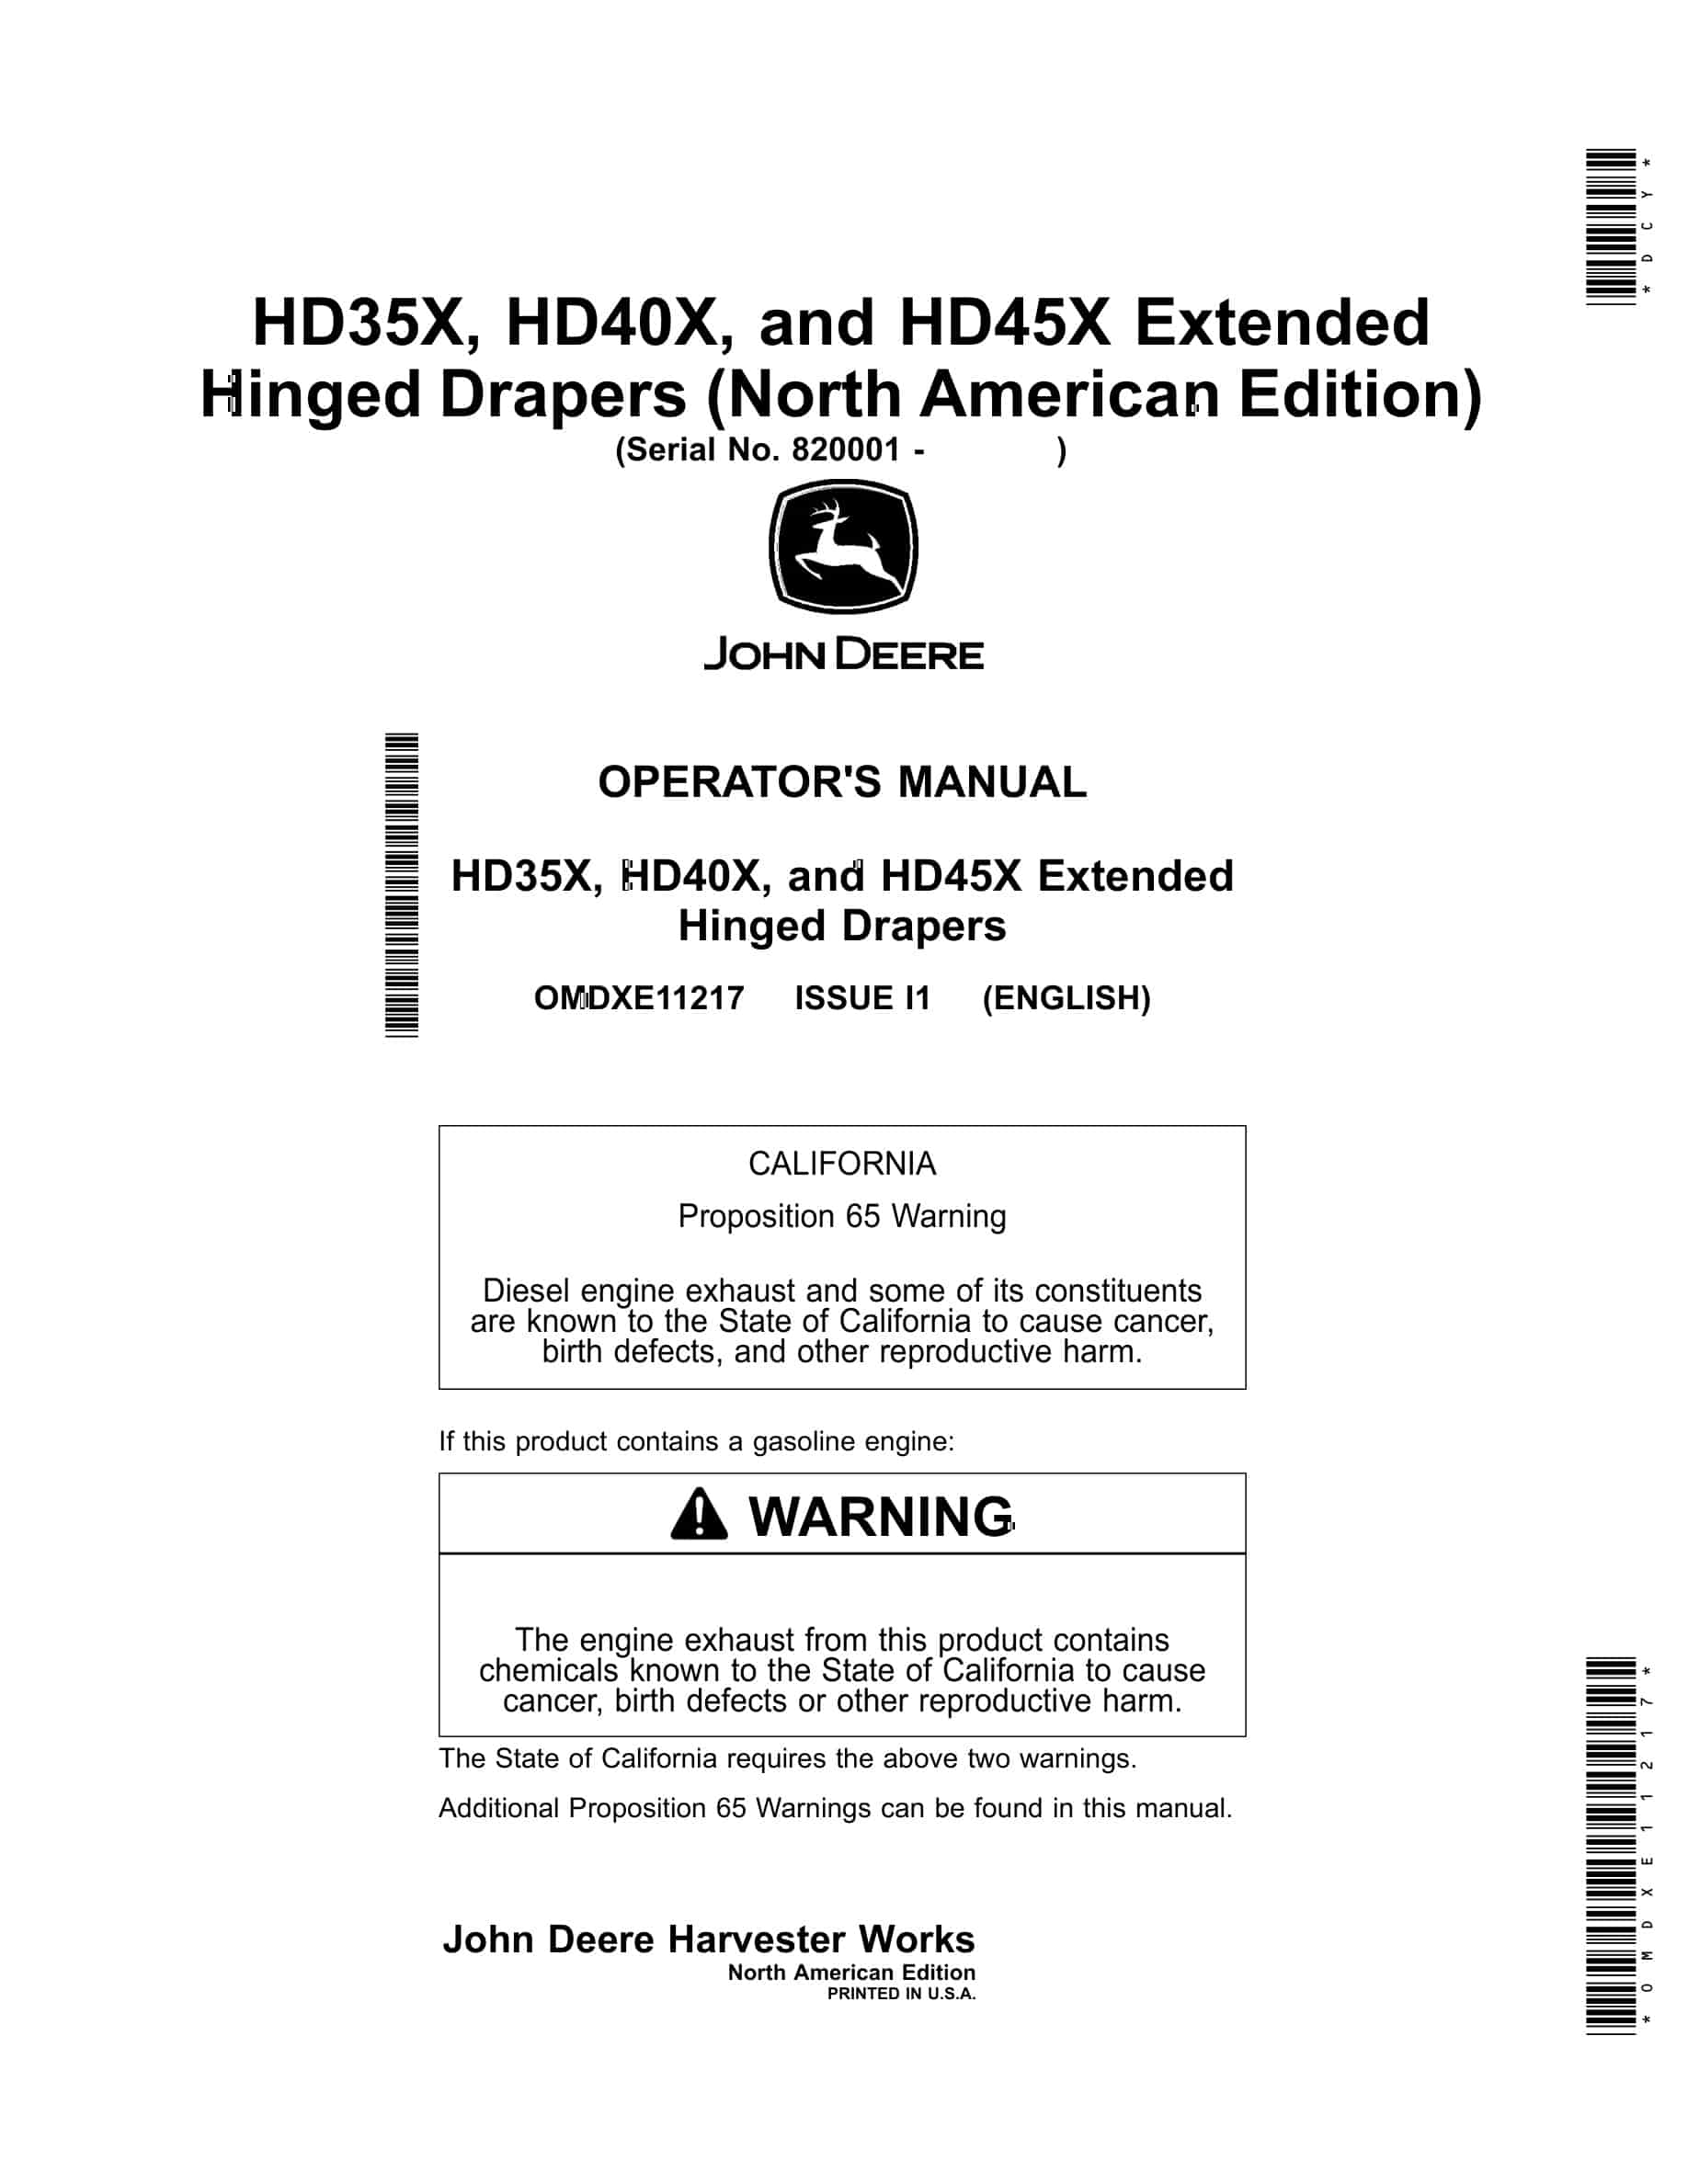 John Deere HD35X, HD40X, and HD45X Extended Hinged Drapers Operator Manual OMDXE11217-1